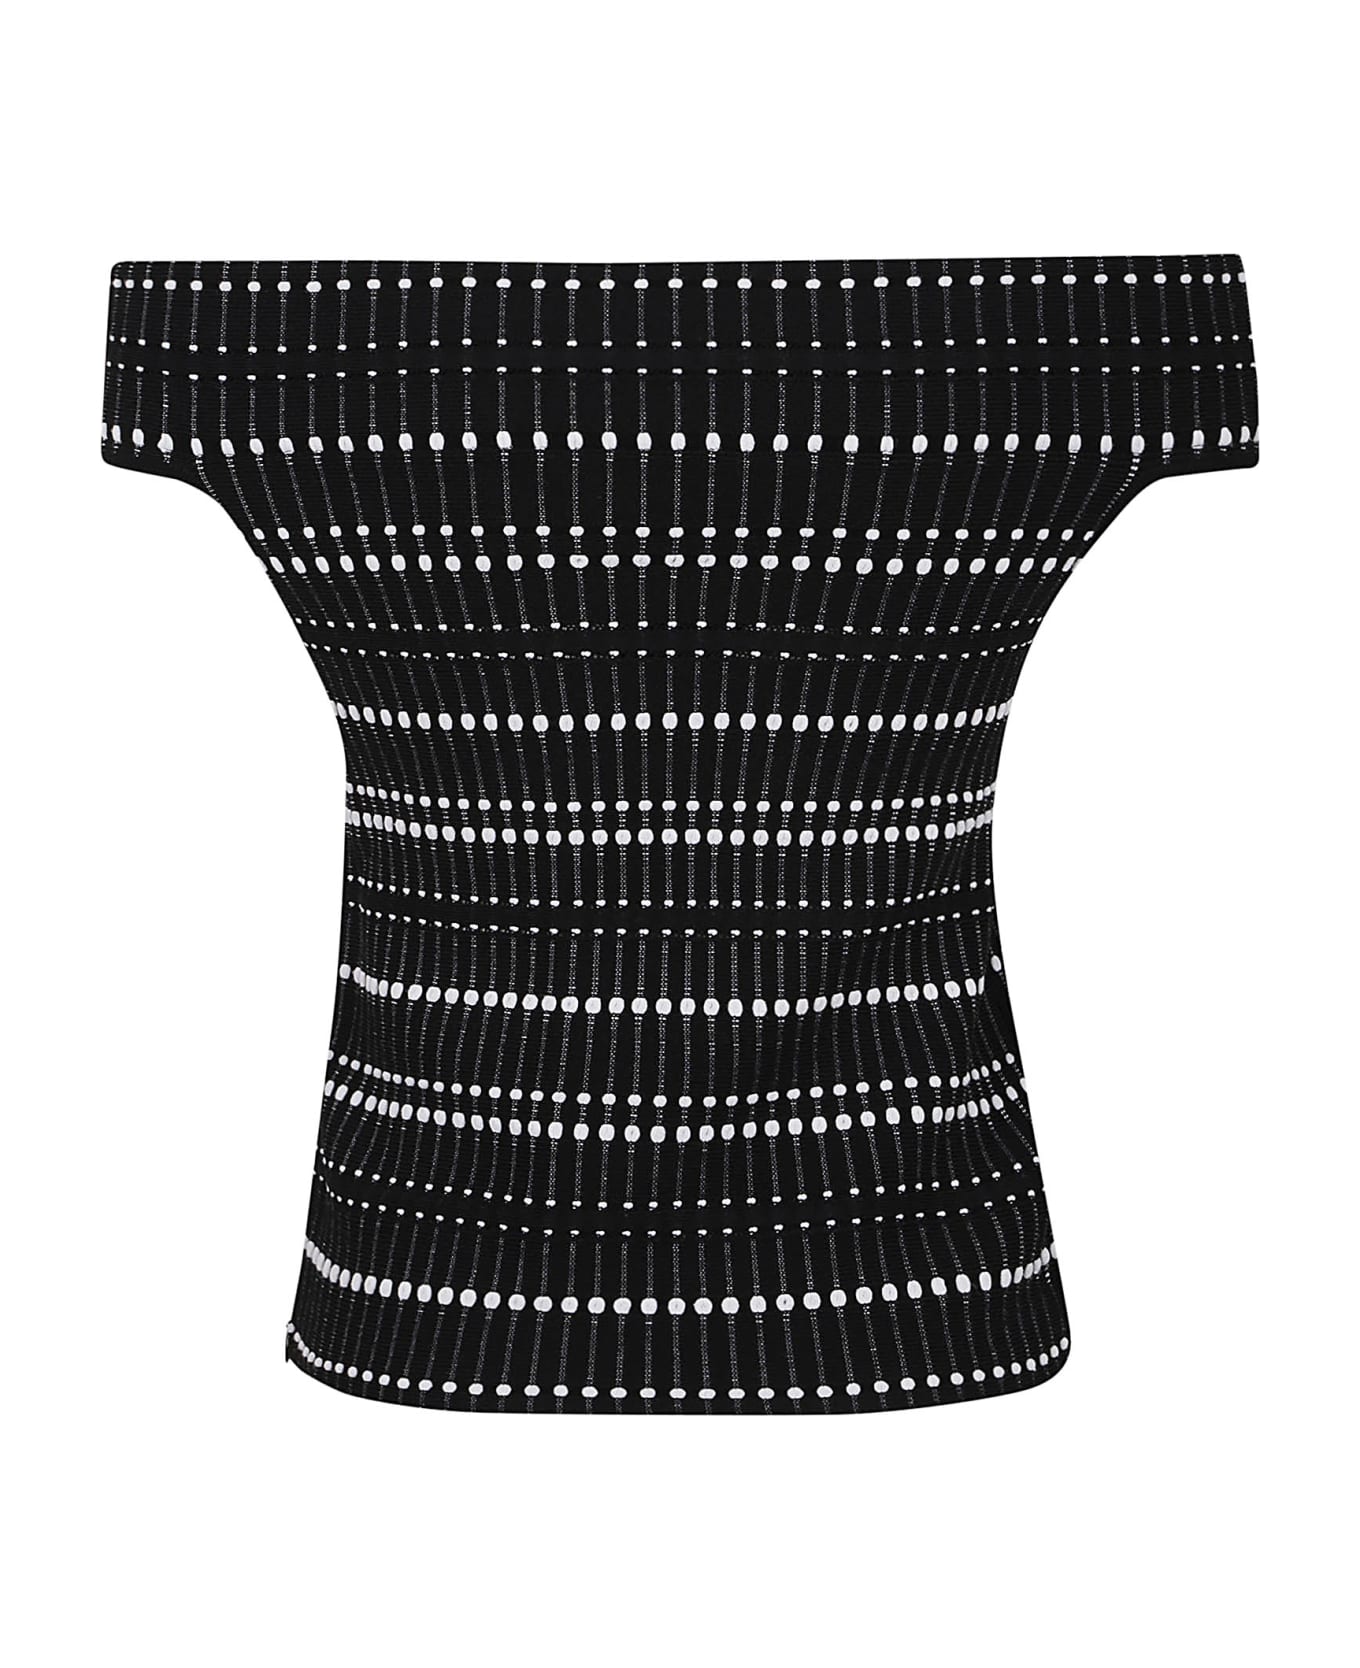 Alexander McQueen Black And White Knitted Top - Nero